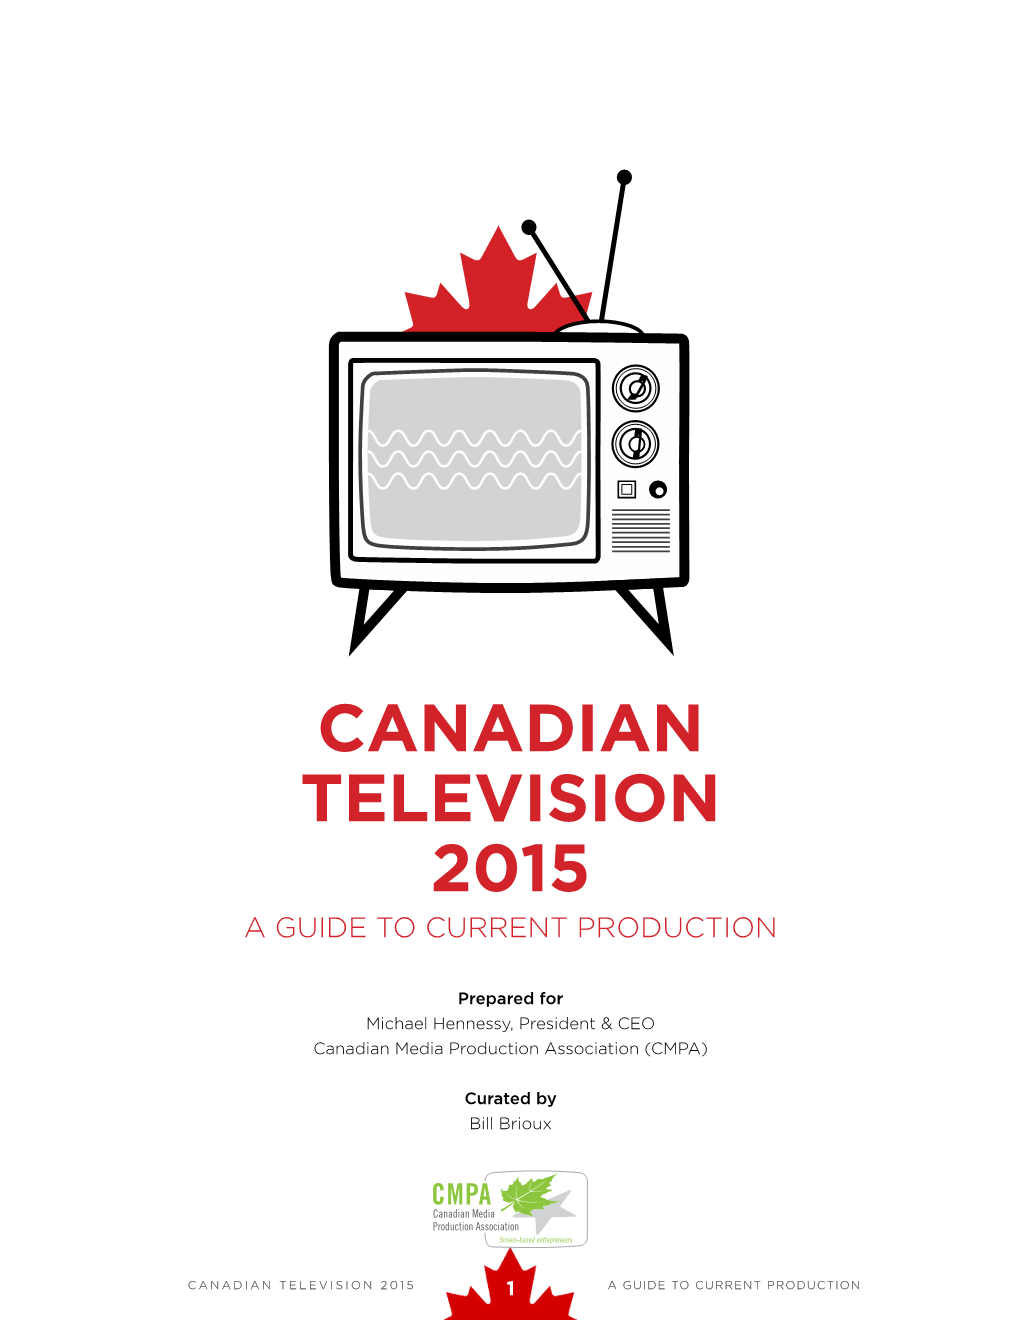 Canadian Television 2015 a Guide to Current Production